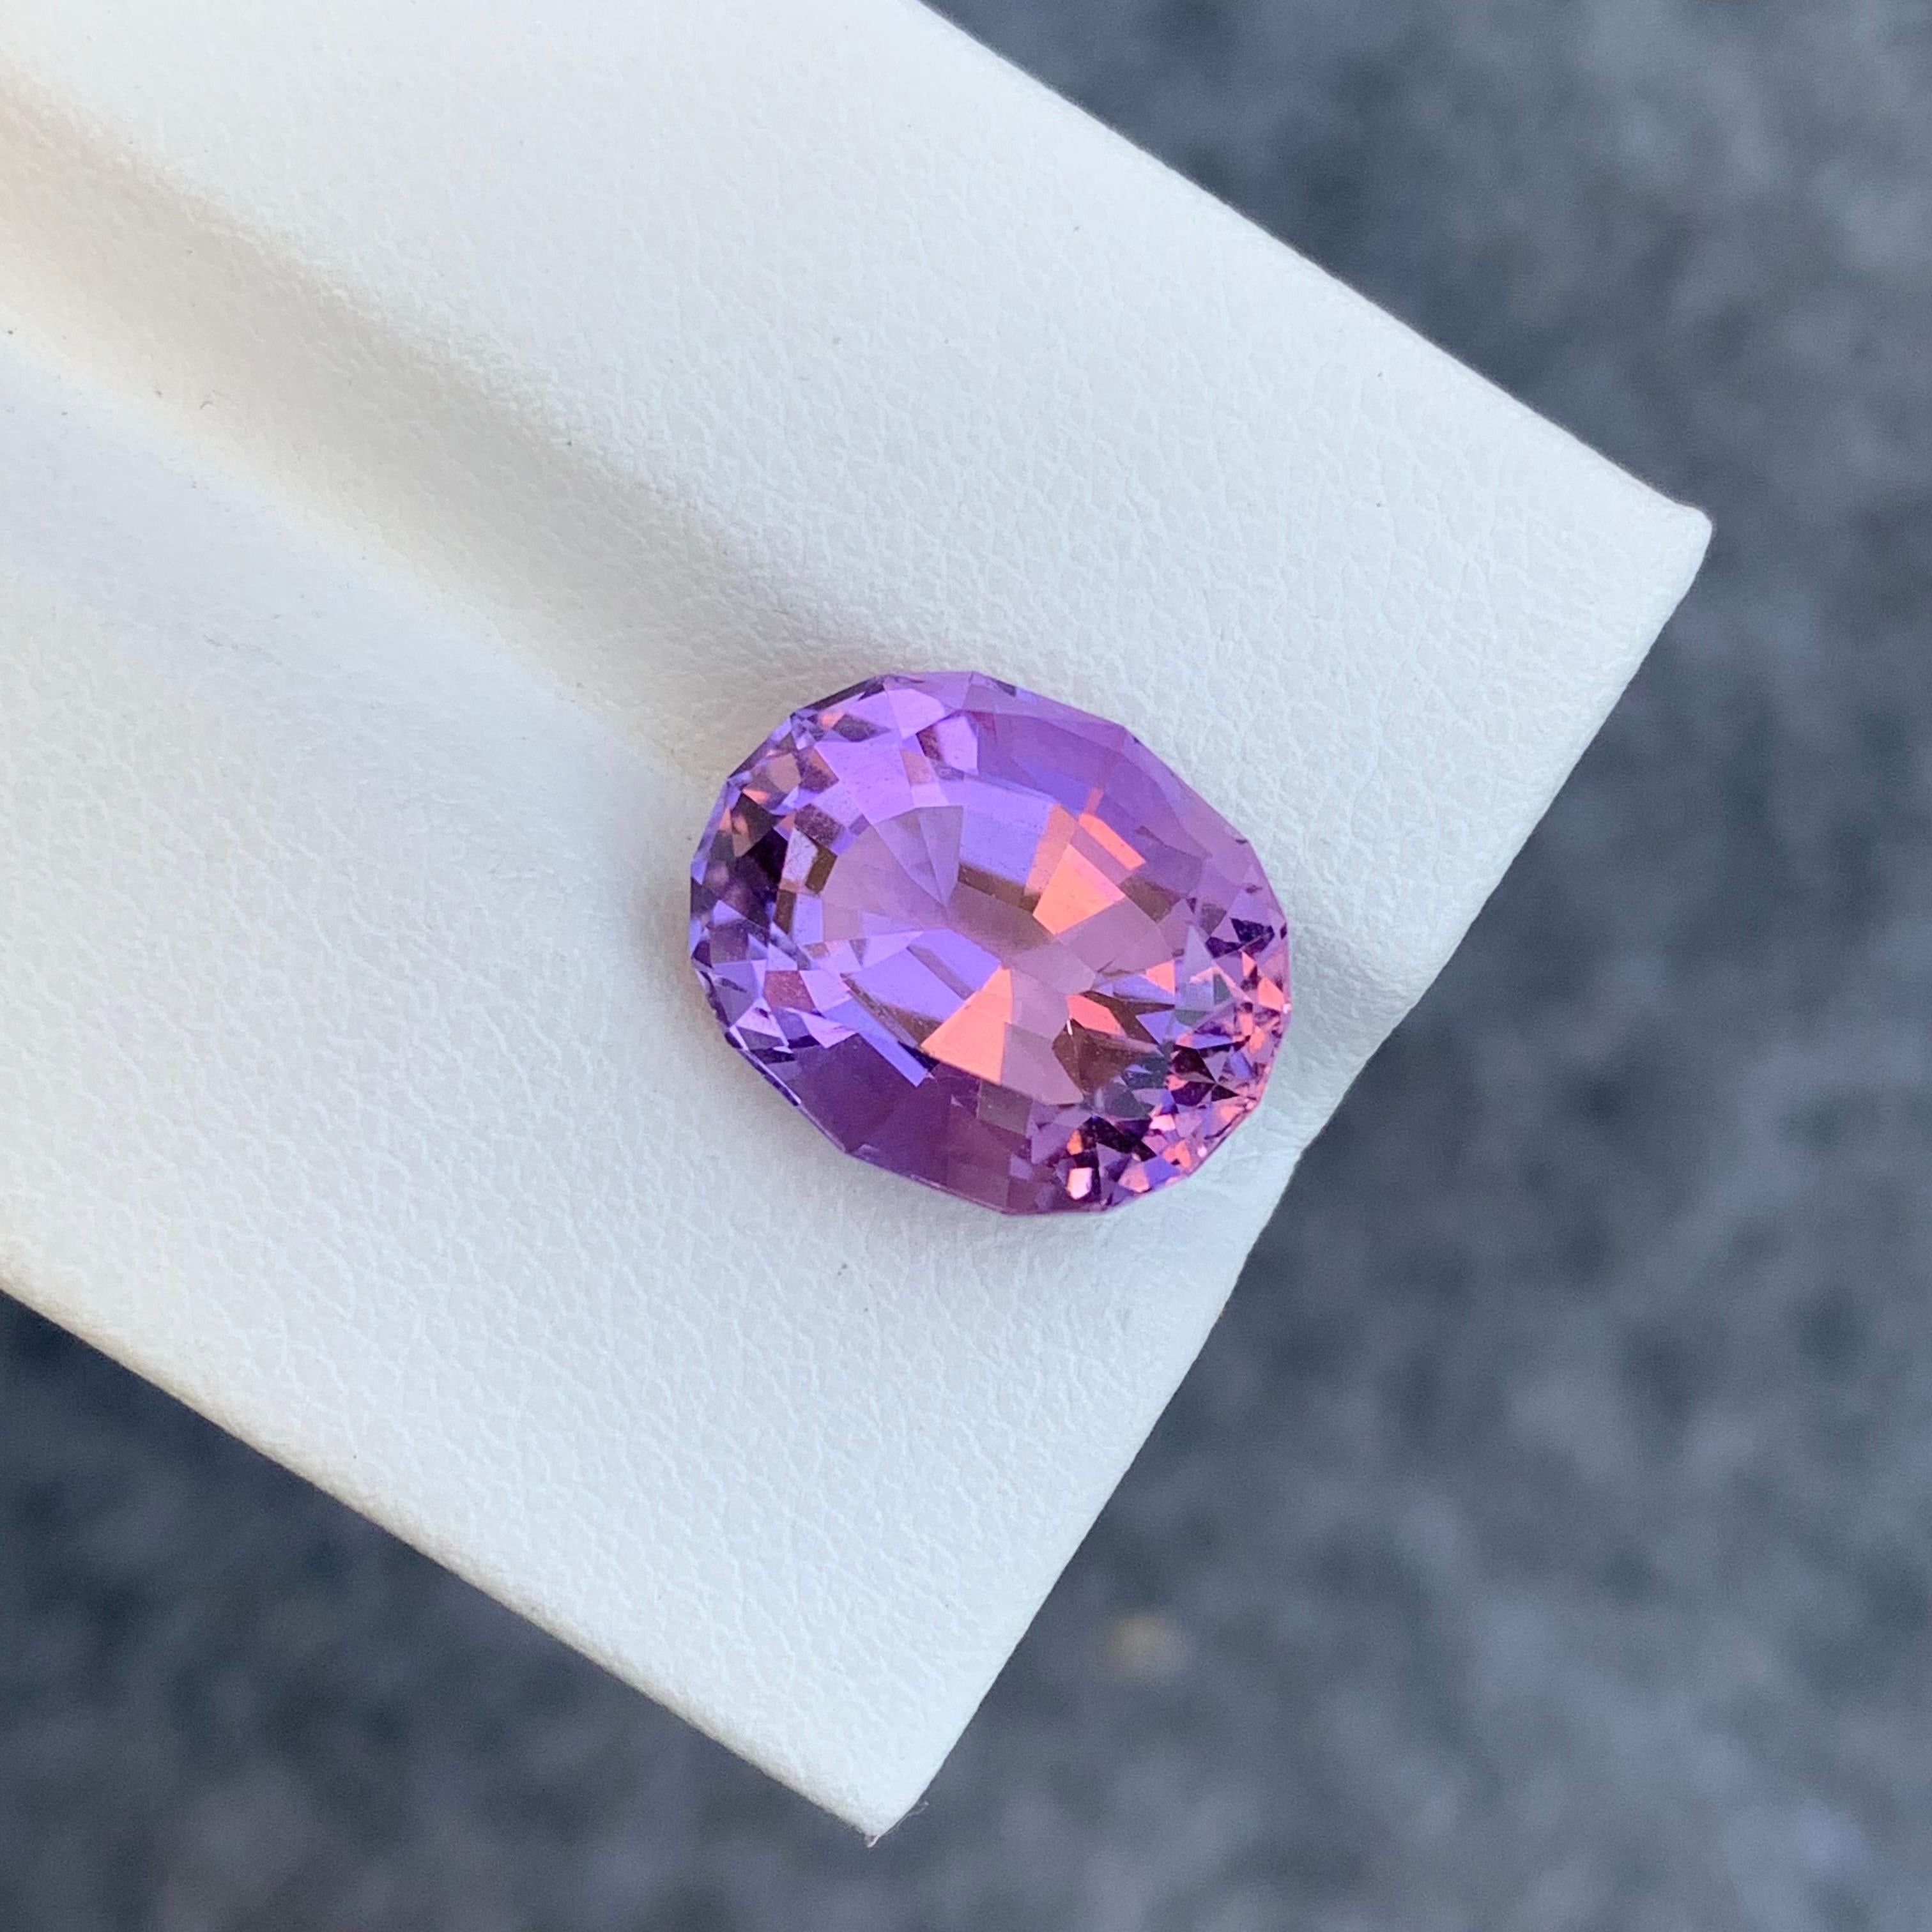 Loose Amethyst
Weight: 6.65 Carats
Dimension: 13.3 x 10.7 x 8.3 Mm
Colour: Purple
Origin: Brazil
Treatment: Non
Certificate: On Demand
Shape: Oval 

Amethyst, a stunning variety of quartz known for its mesmerizing purple hue, has captivated humans